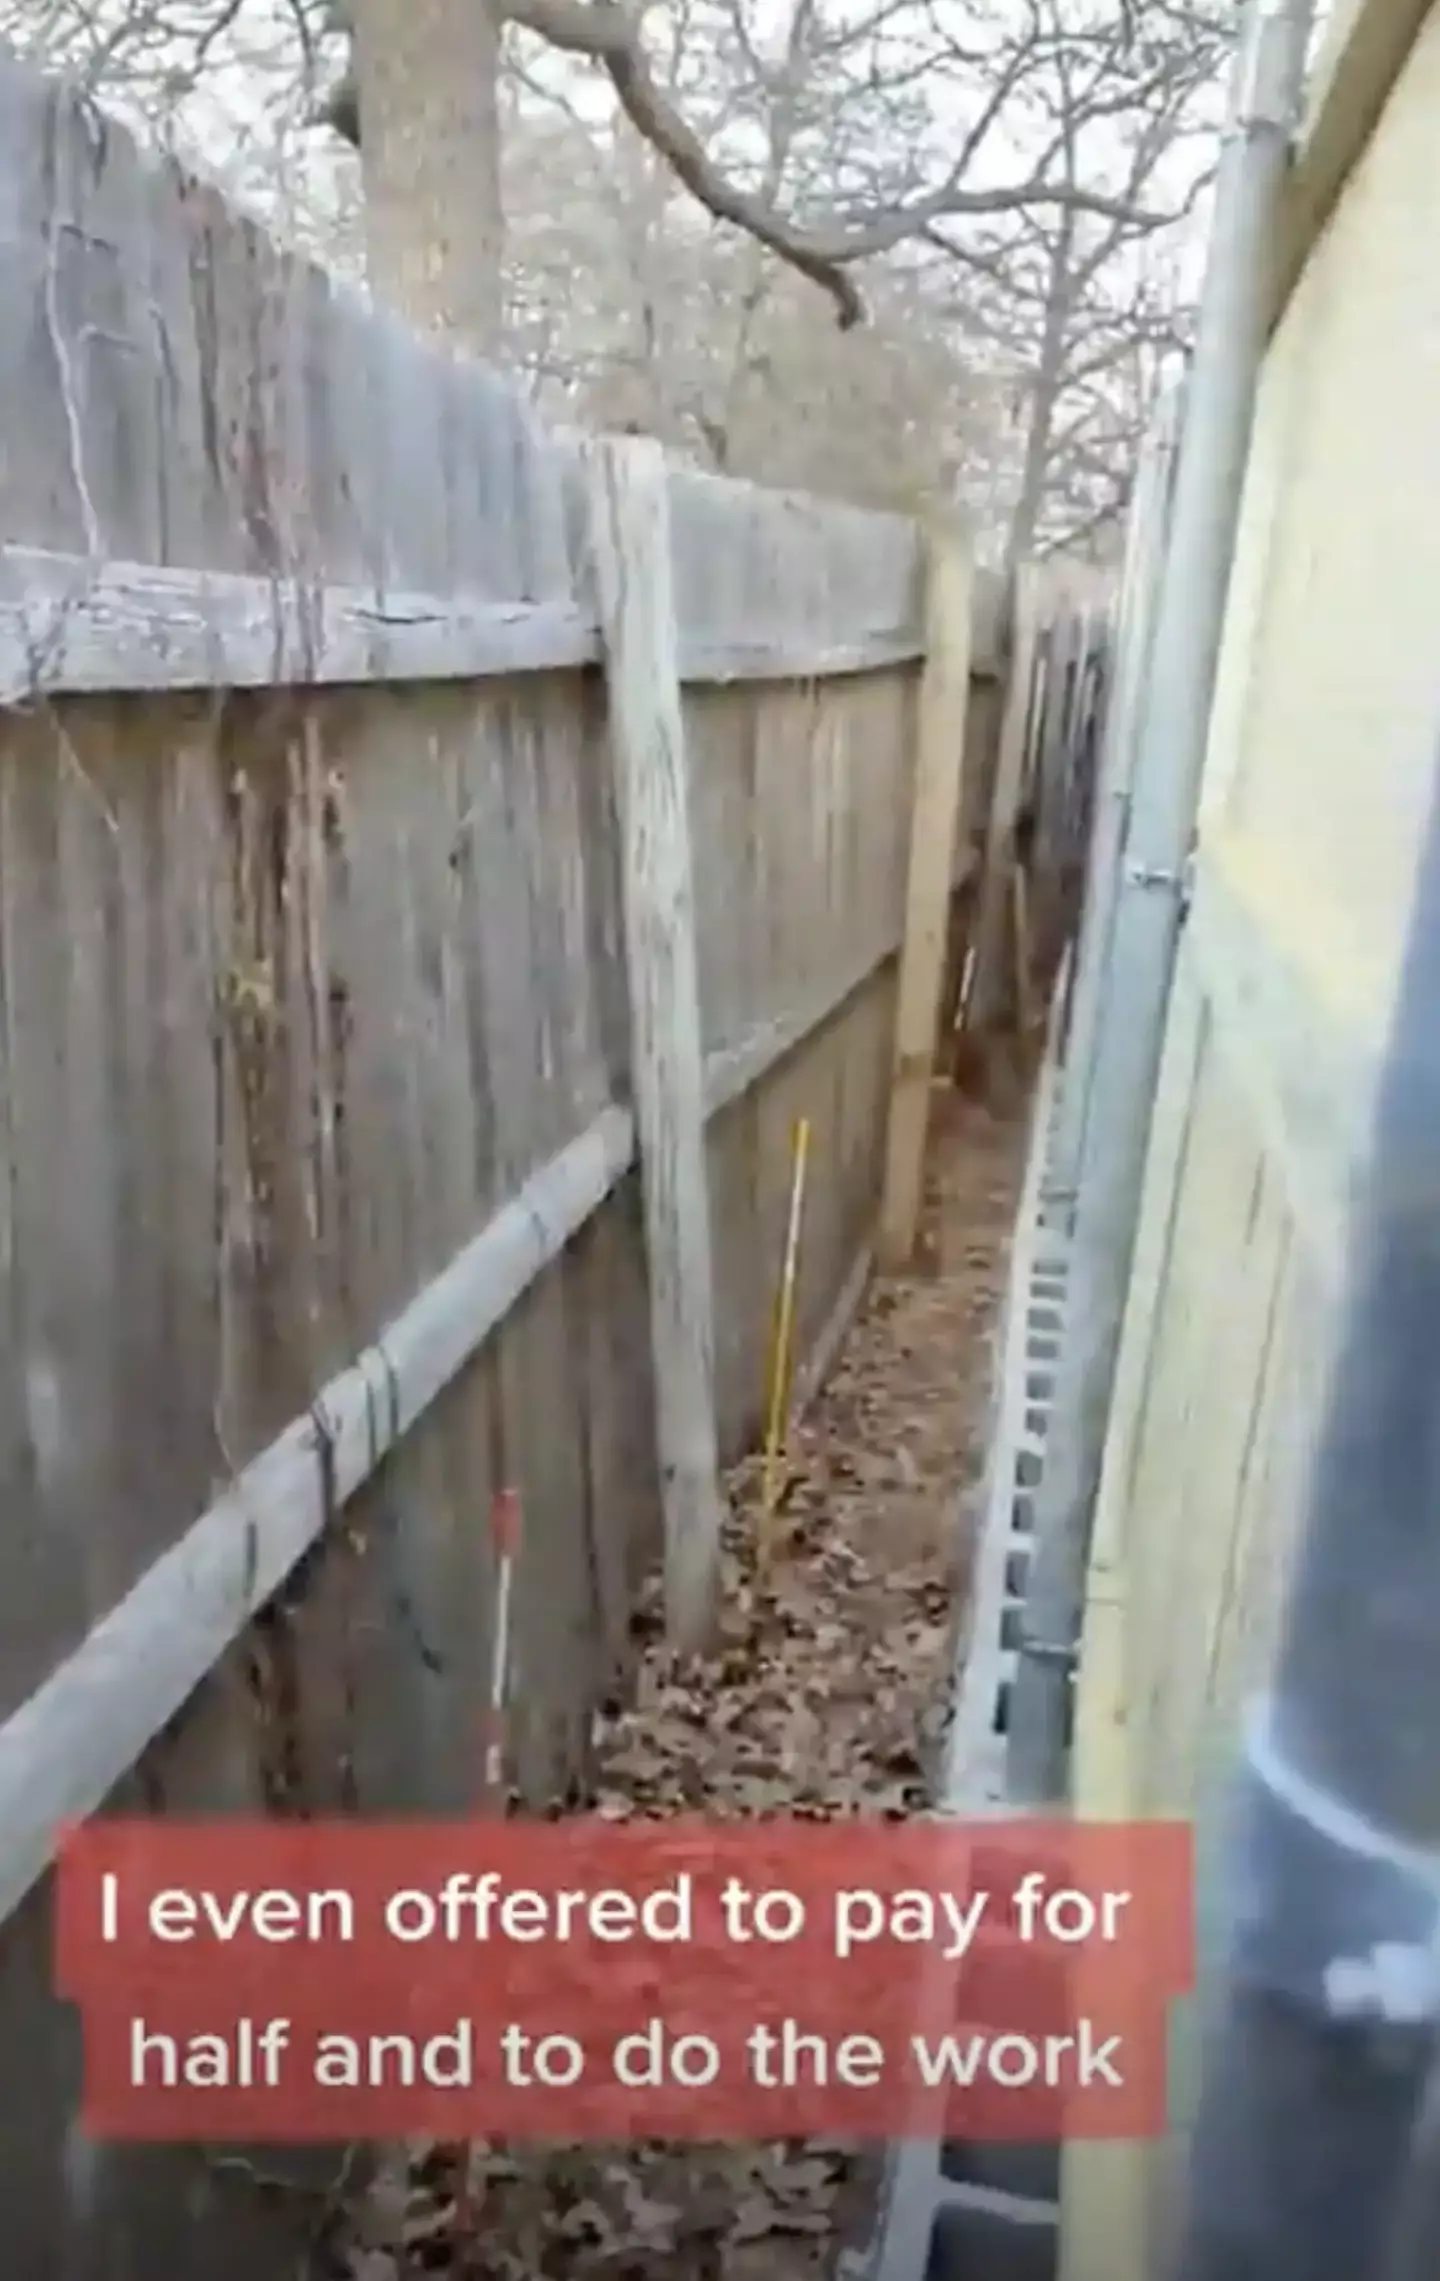 The man feared the old fence would 'fall down'.